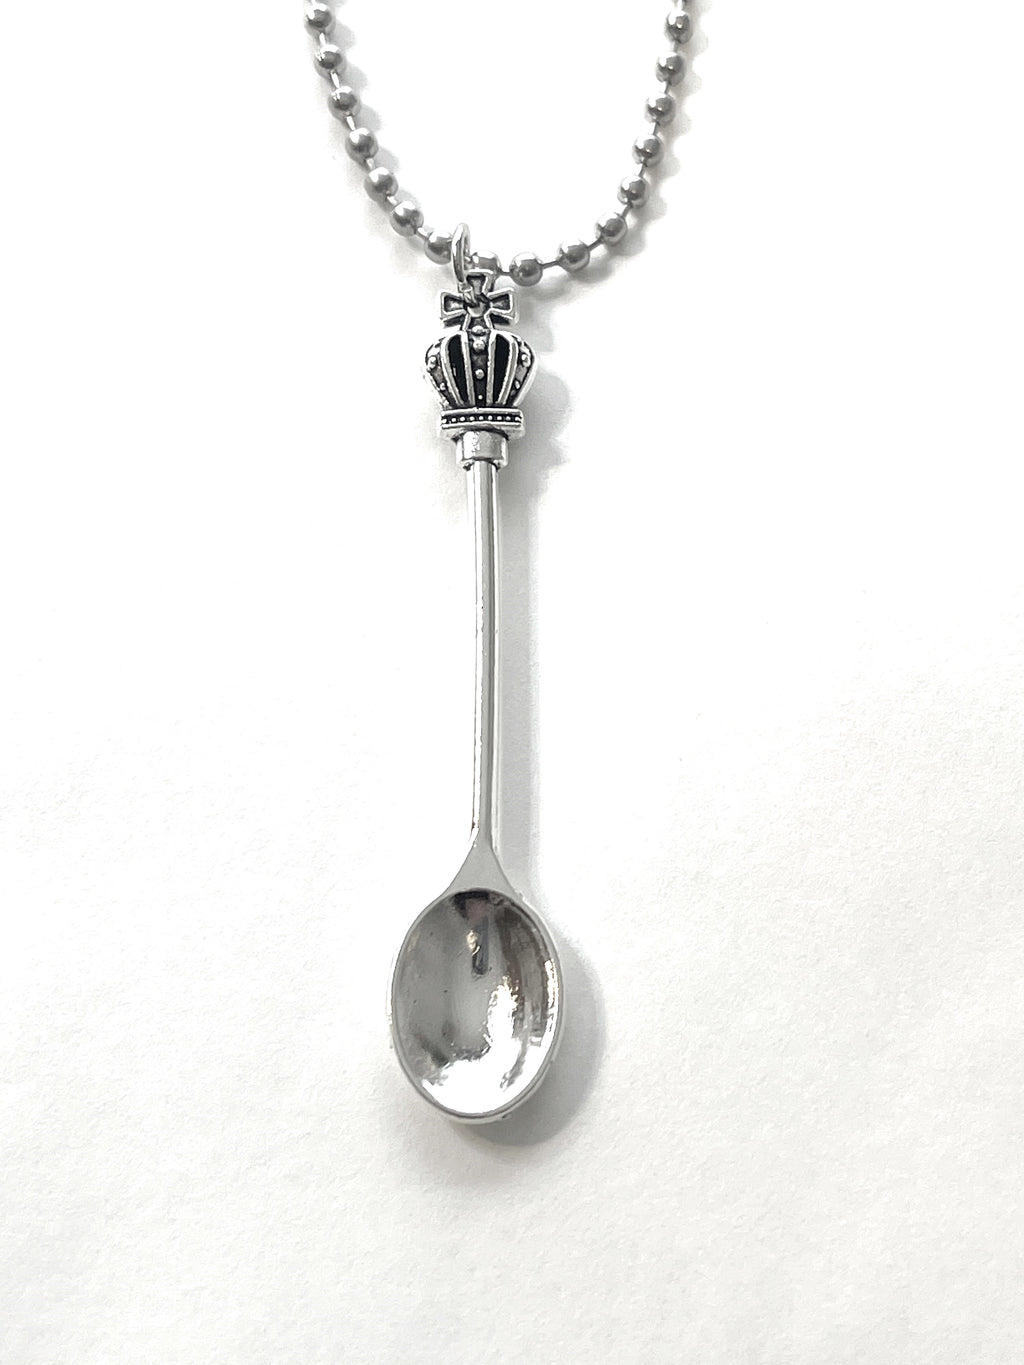 Purchase Wholesale Spoon Necklaces From Suppliers - Alibaba.com